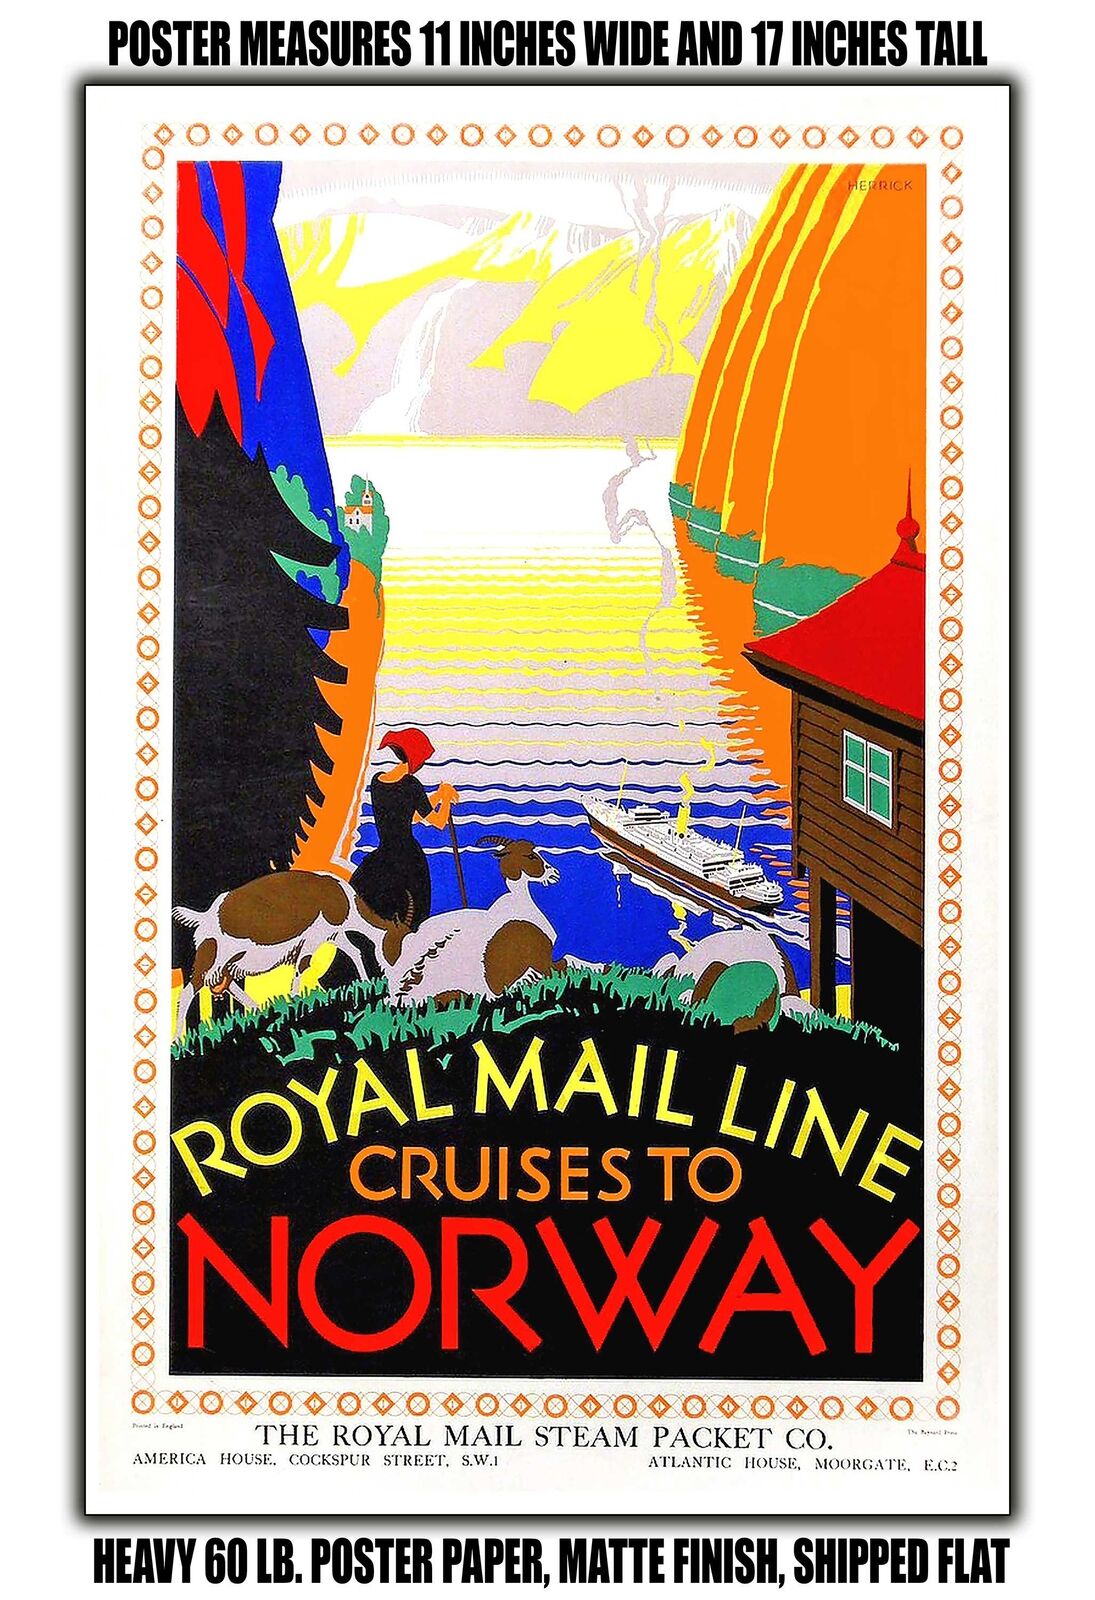 11x17 POSTER - 1925 Royal Mail Line Cruises to Norway